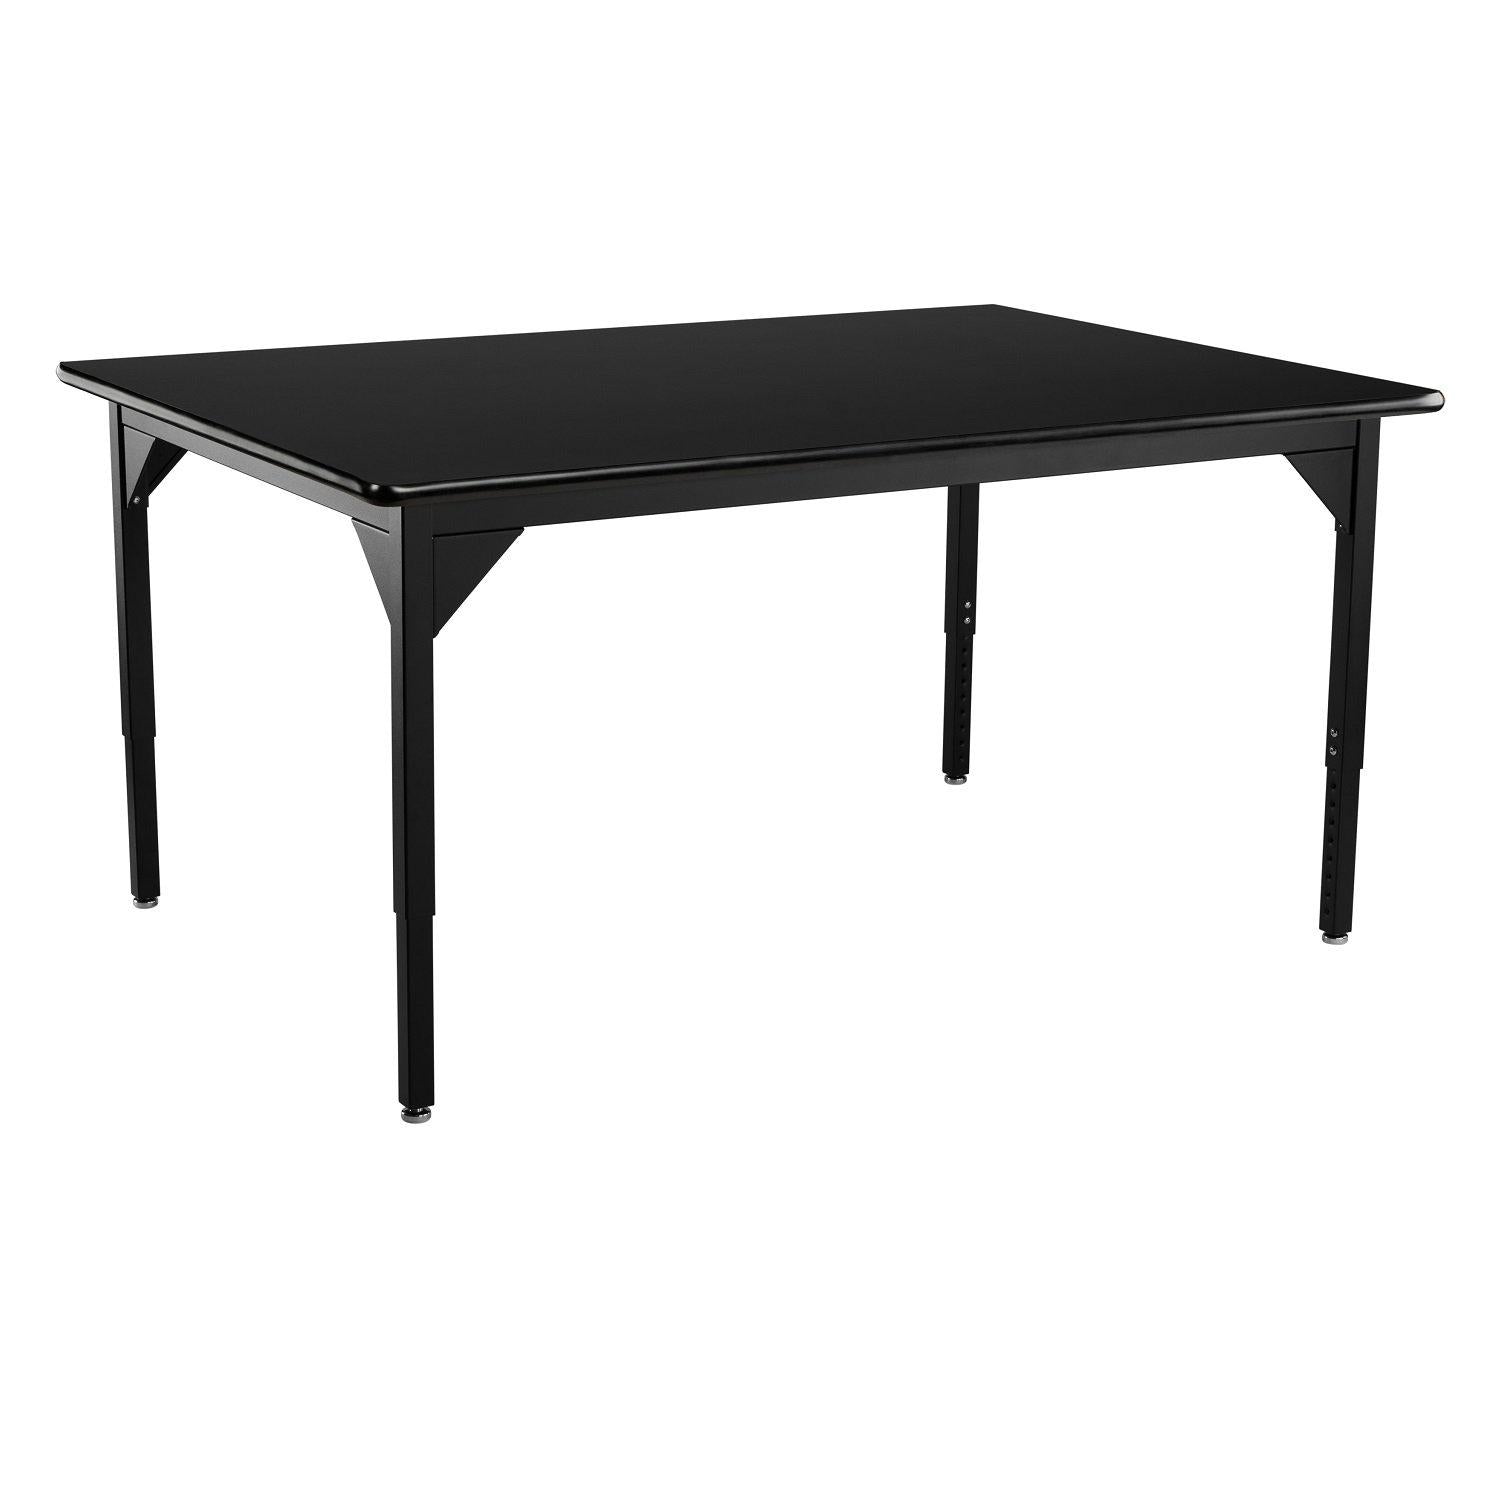 Heavy-Duty Height-Adjustable Utility Table, Black Frame, 42" x 42", High-Pressure Laminate Top with T-Mold Edge